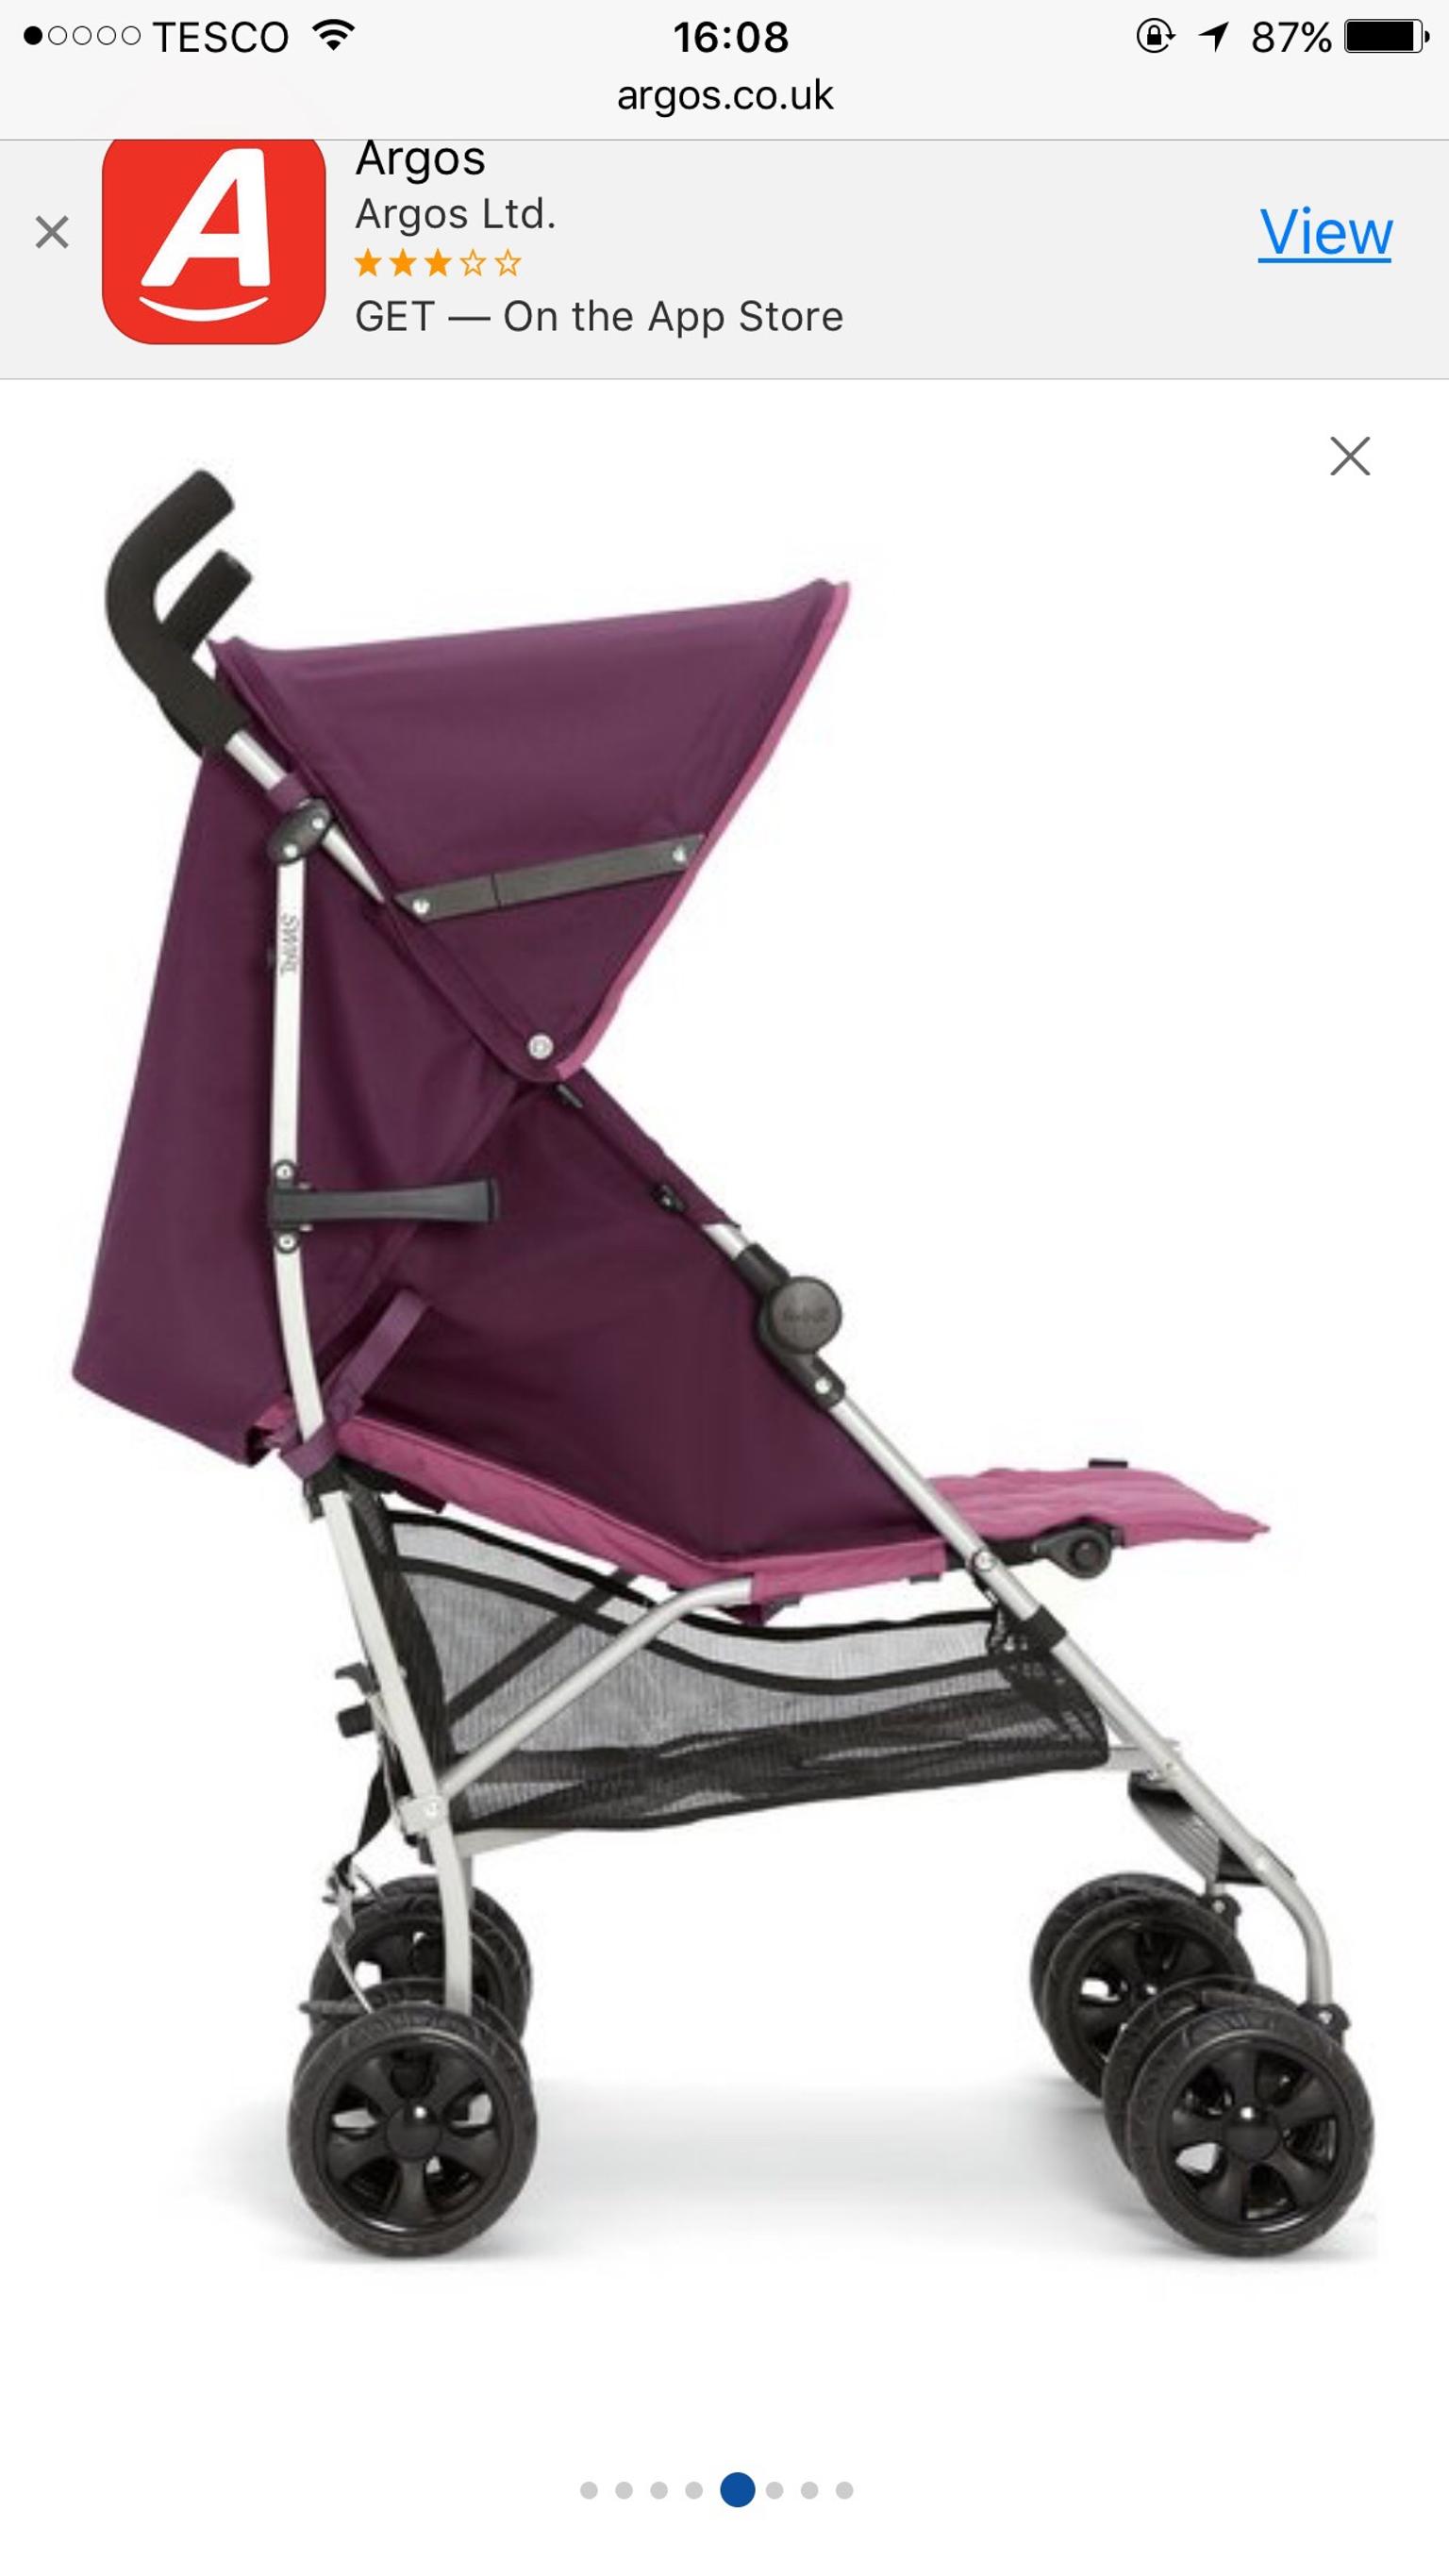 Mamas and papas pushchair from Argos in 